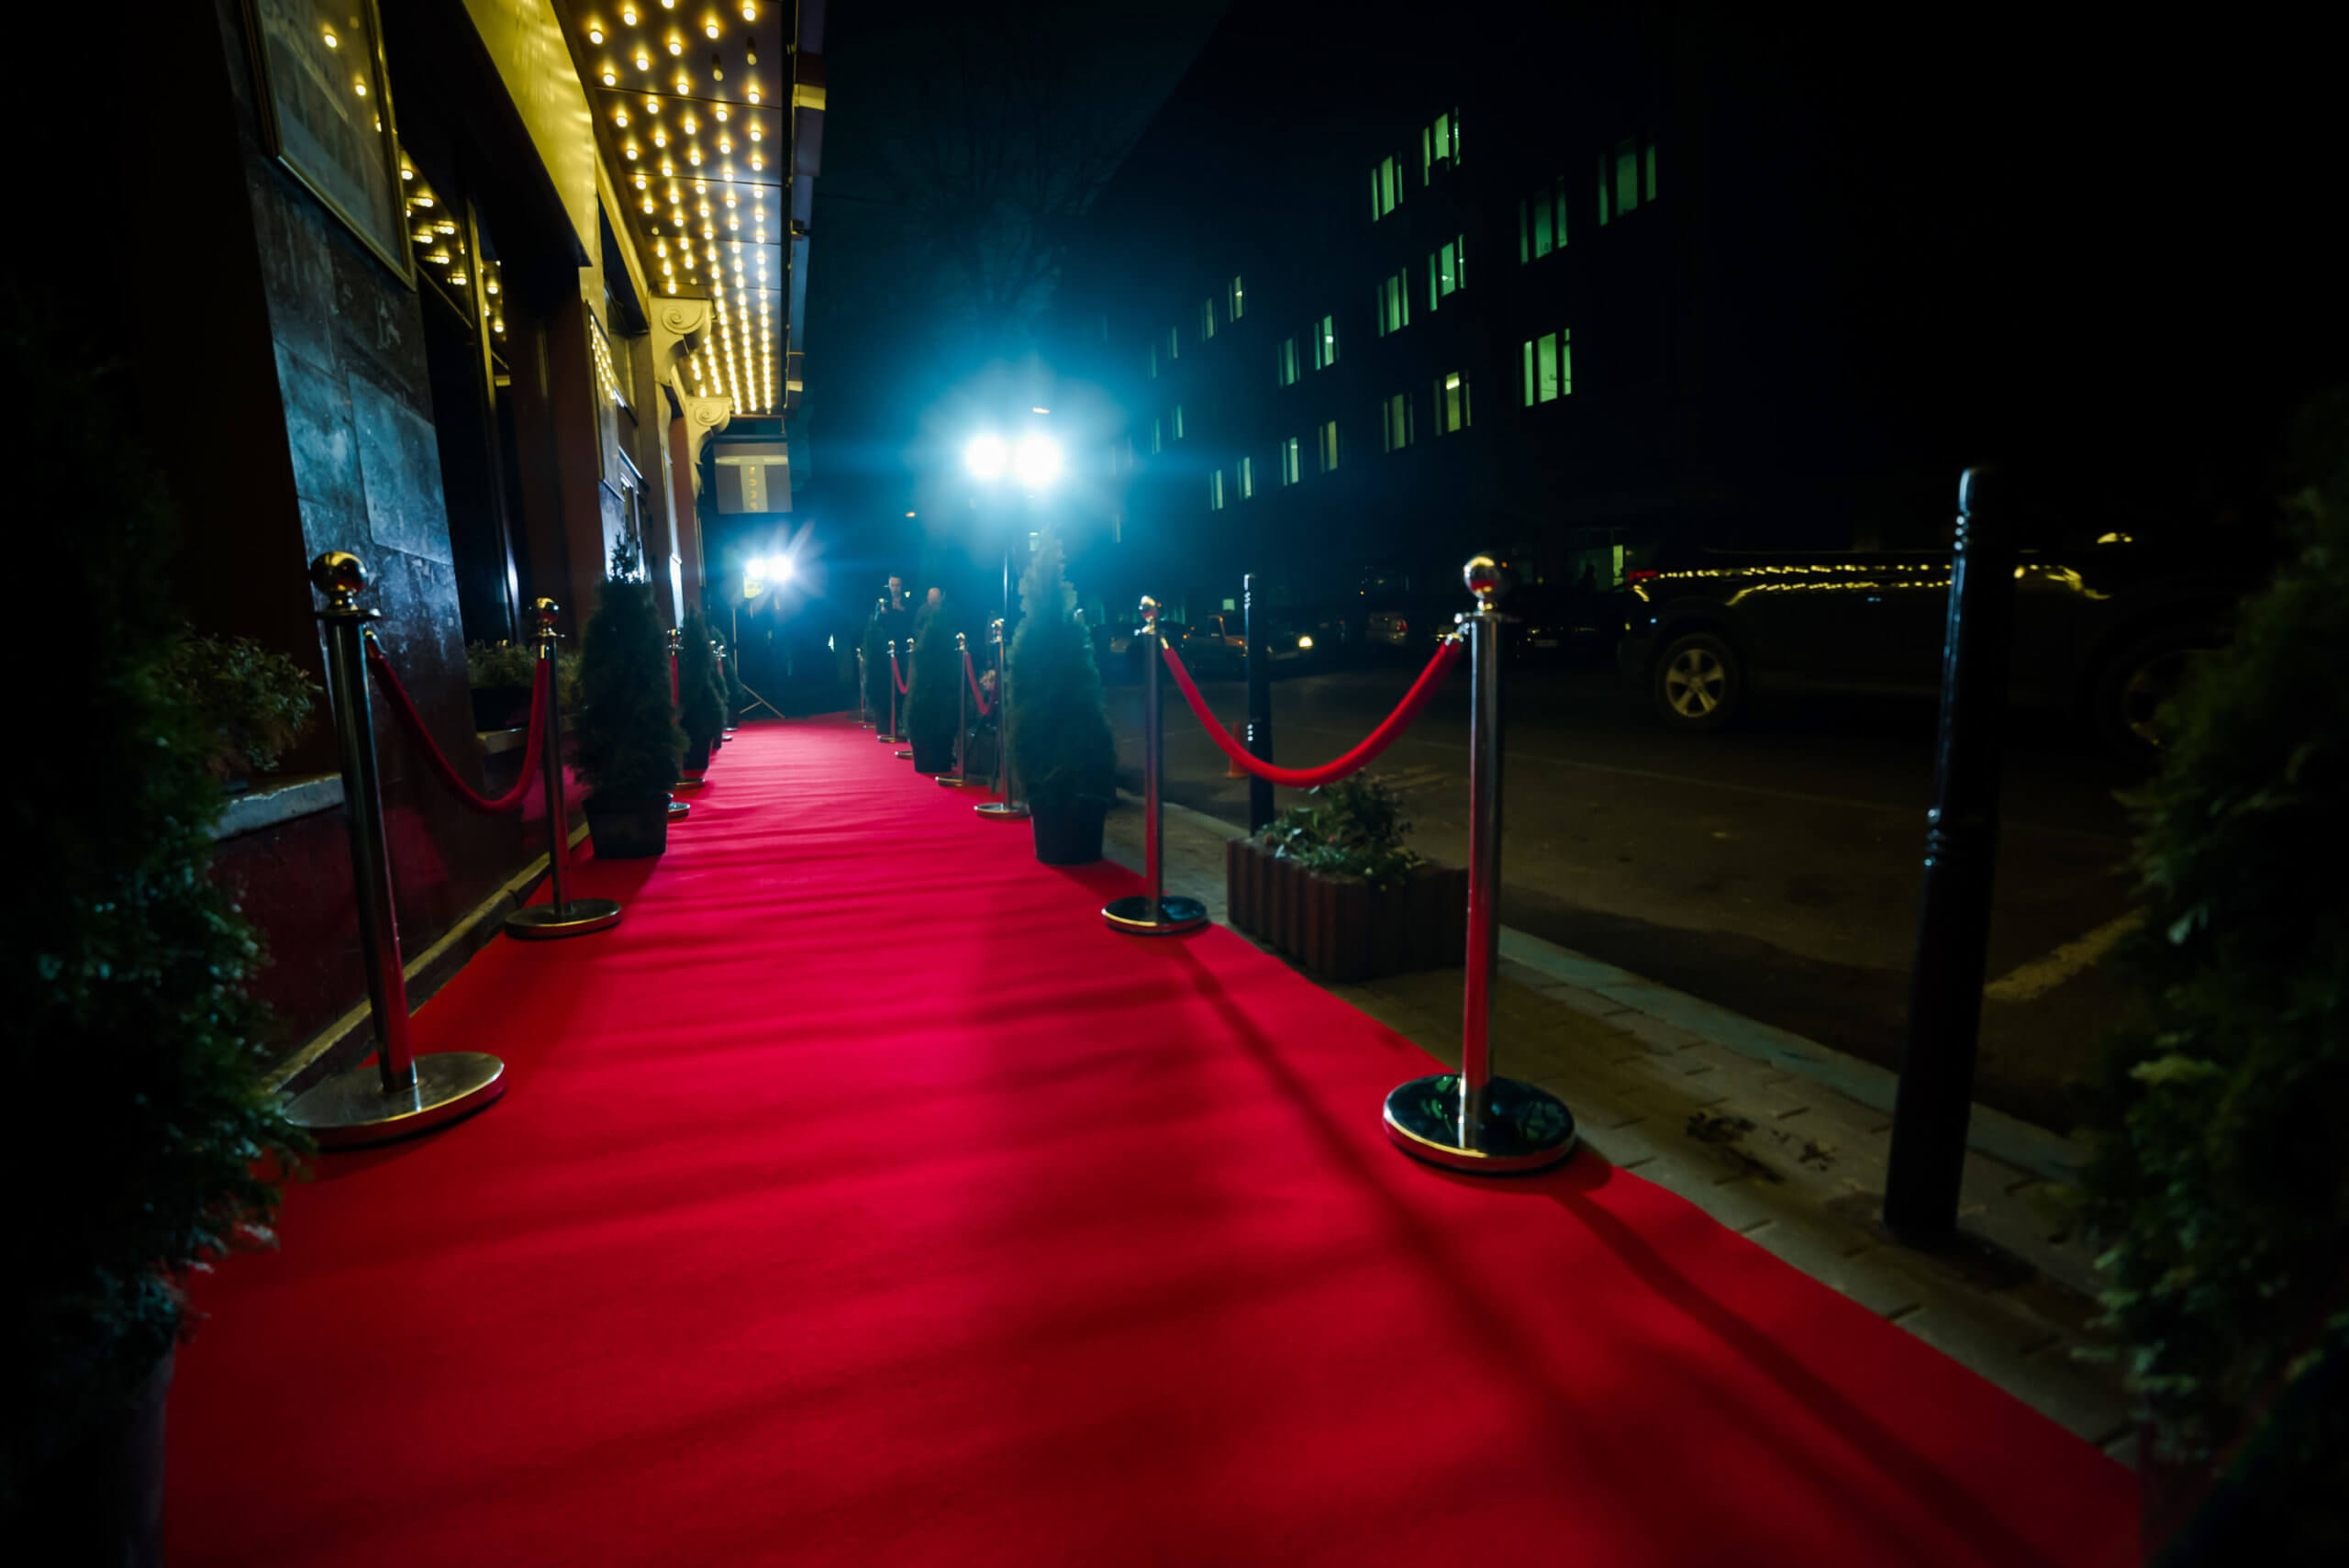 Red carpet surrounded by plants, cordage and lighting